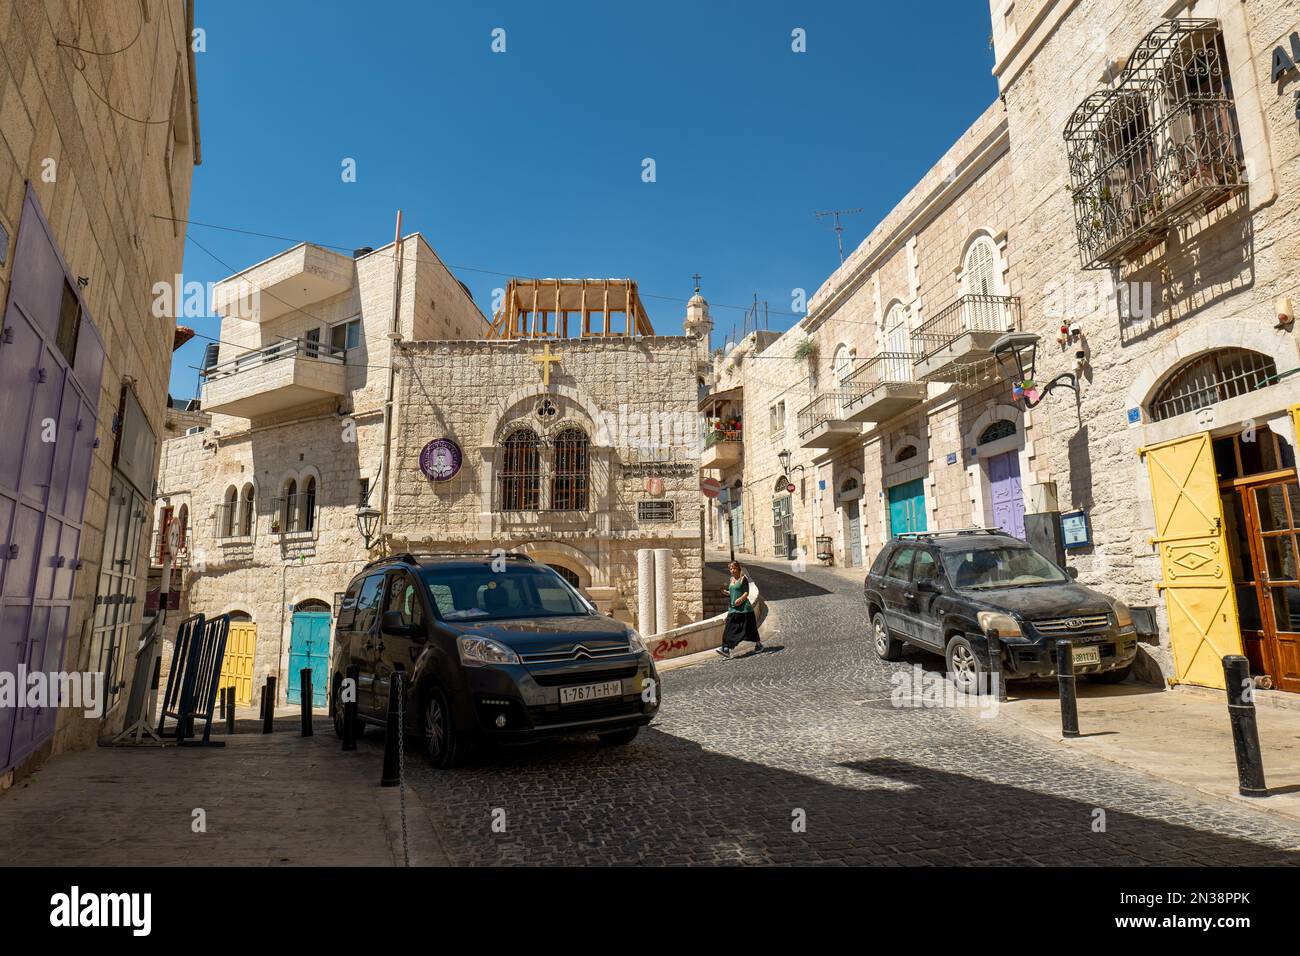 Bethlehem West Bank Palestine 21 July 2022 Female Tourist Walks In The Narrow Streets Of Old White Stone Walls And Classical Buildings Of The Old 2N38PPK 